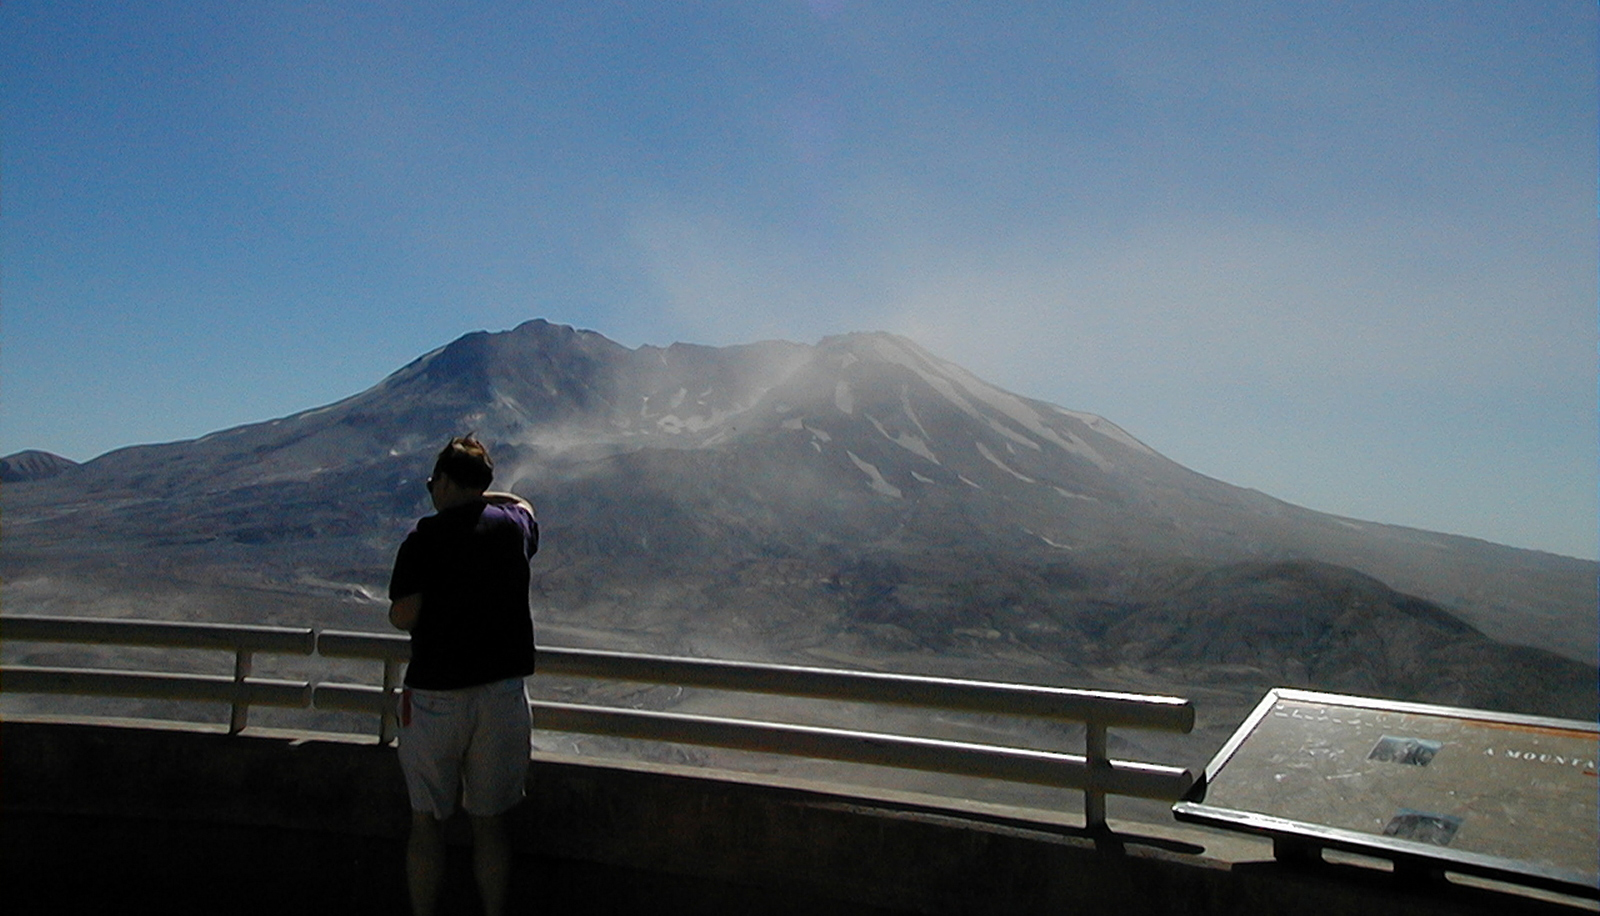 Paul standing at the Visitor's Center in front of Mount Saint Helens